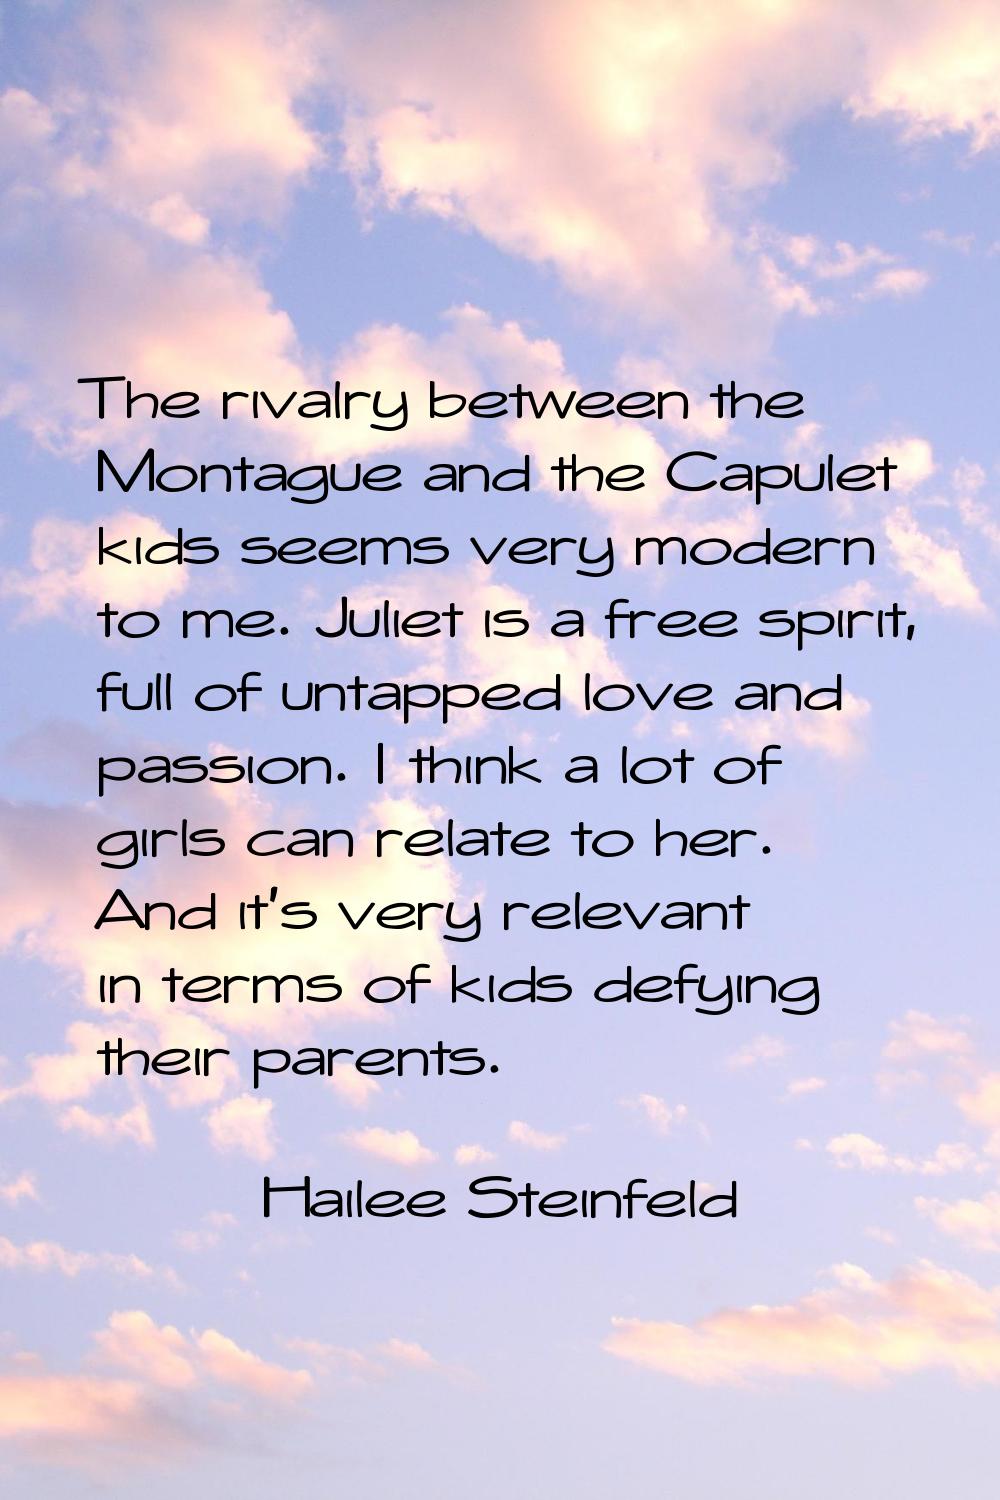 The rivalry between the Montague and the Capulet kids seems very modern to me. Juliet is a free spi